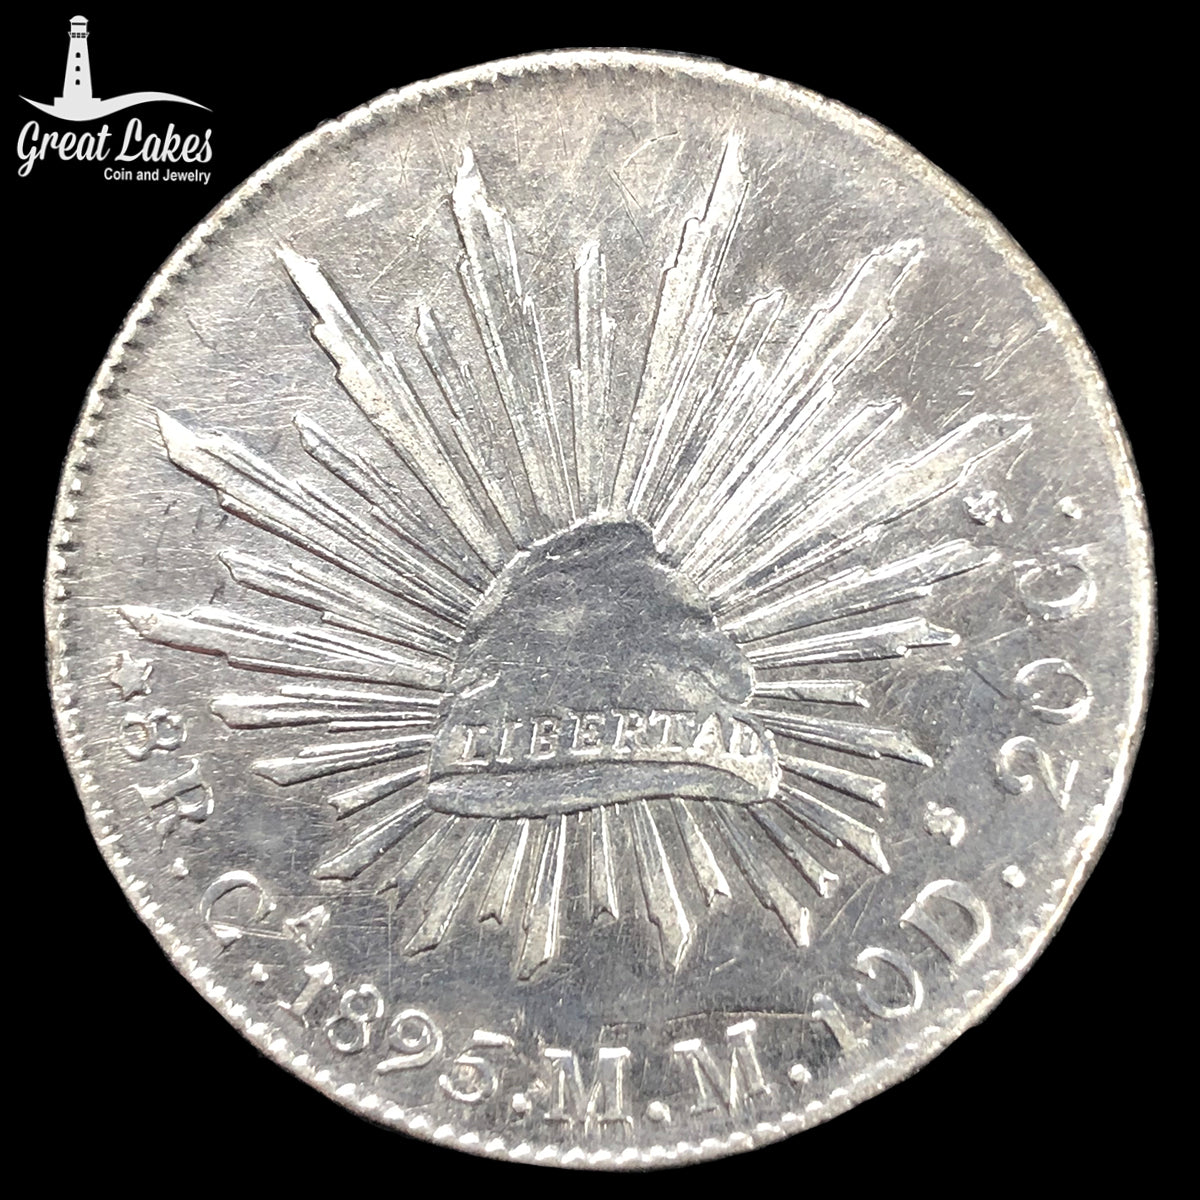 1895 Ca MM Mexico 8 Reales - Chihuahua (XF) (Cleaned)